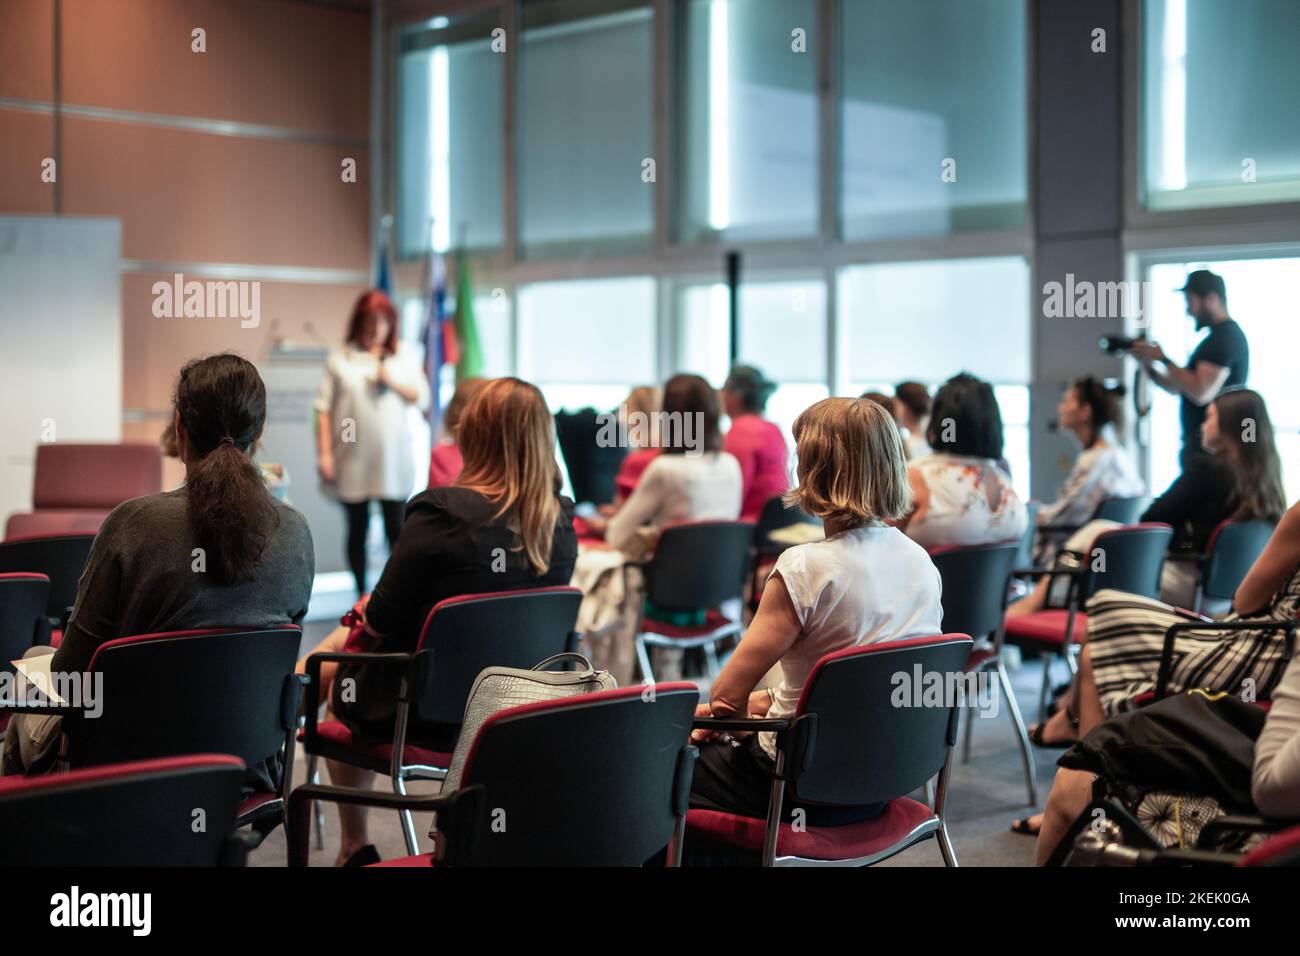 Business and entrepreneurship symposium. Female speaker giving a talk at business meeting. Audience in conference hall. Rear view of unrecognized participant in audience. Stock Photo